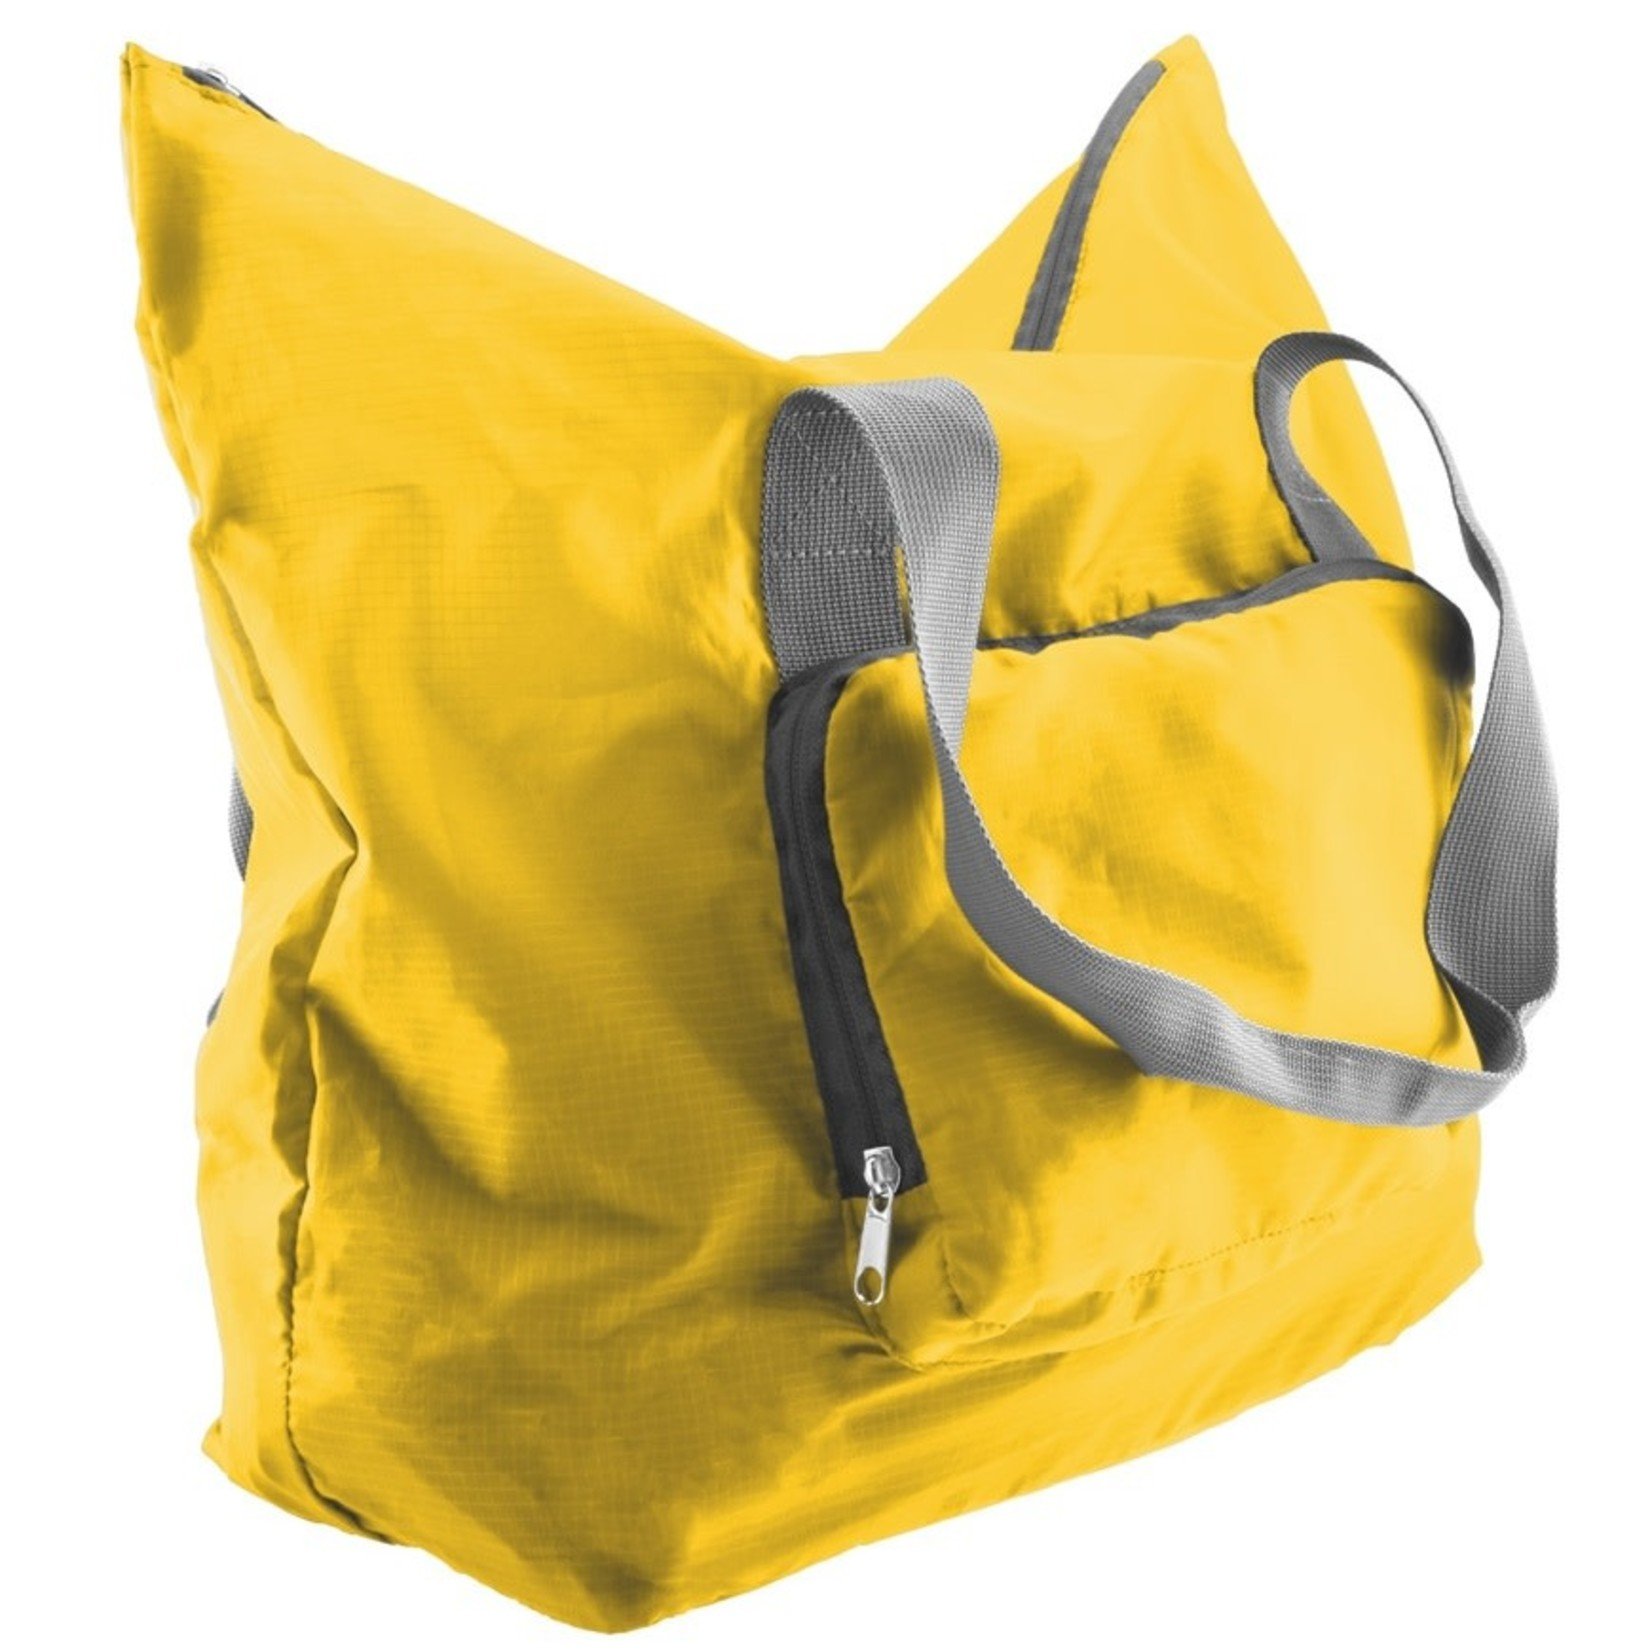 Sona SE Water Resistant Collapsible Tote Bag